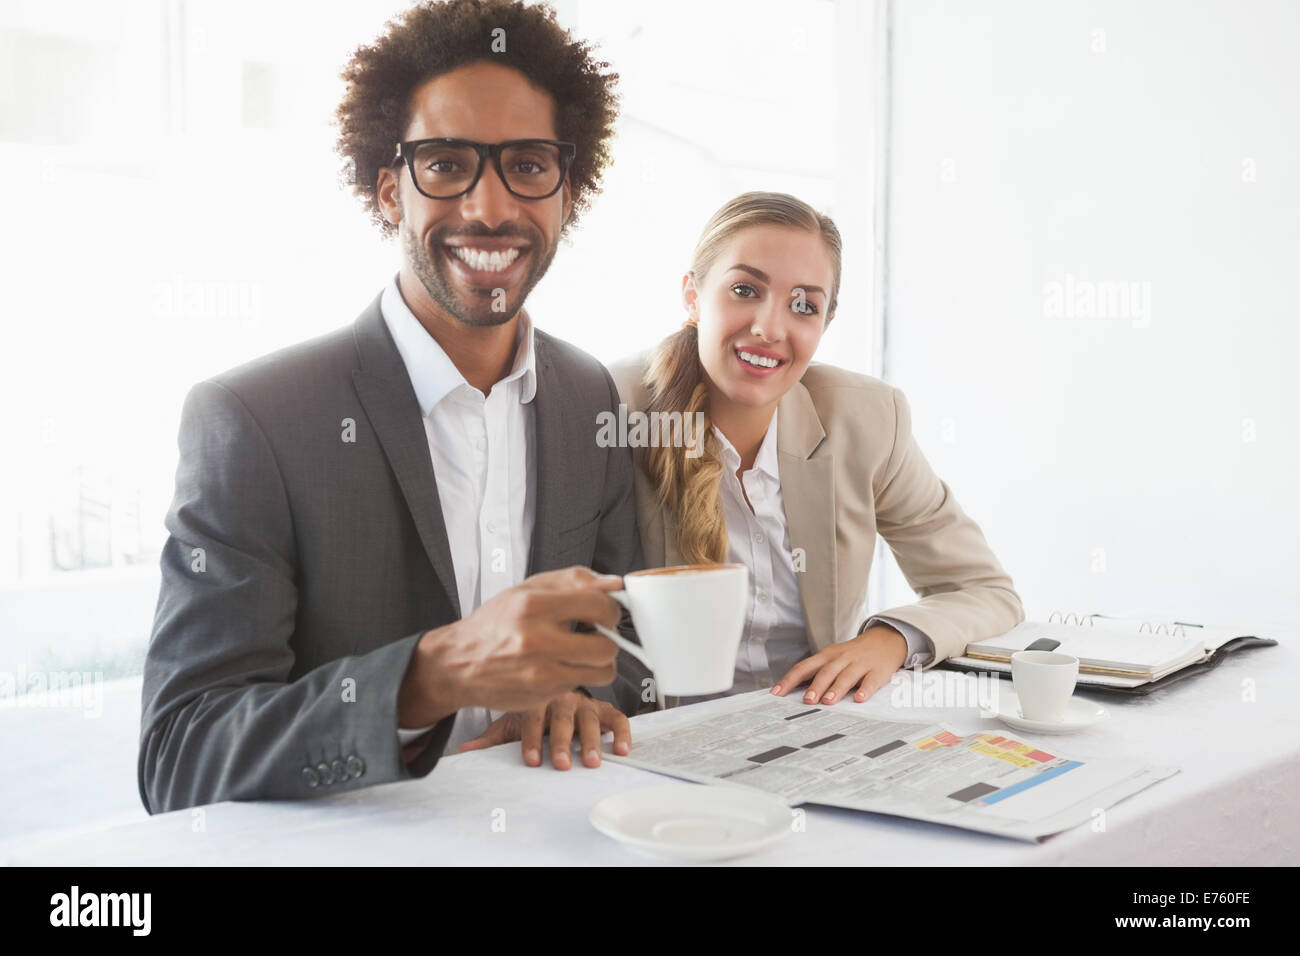 Business people having coffee smiling at camera Stock Photo